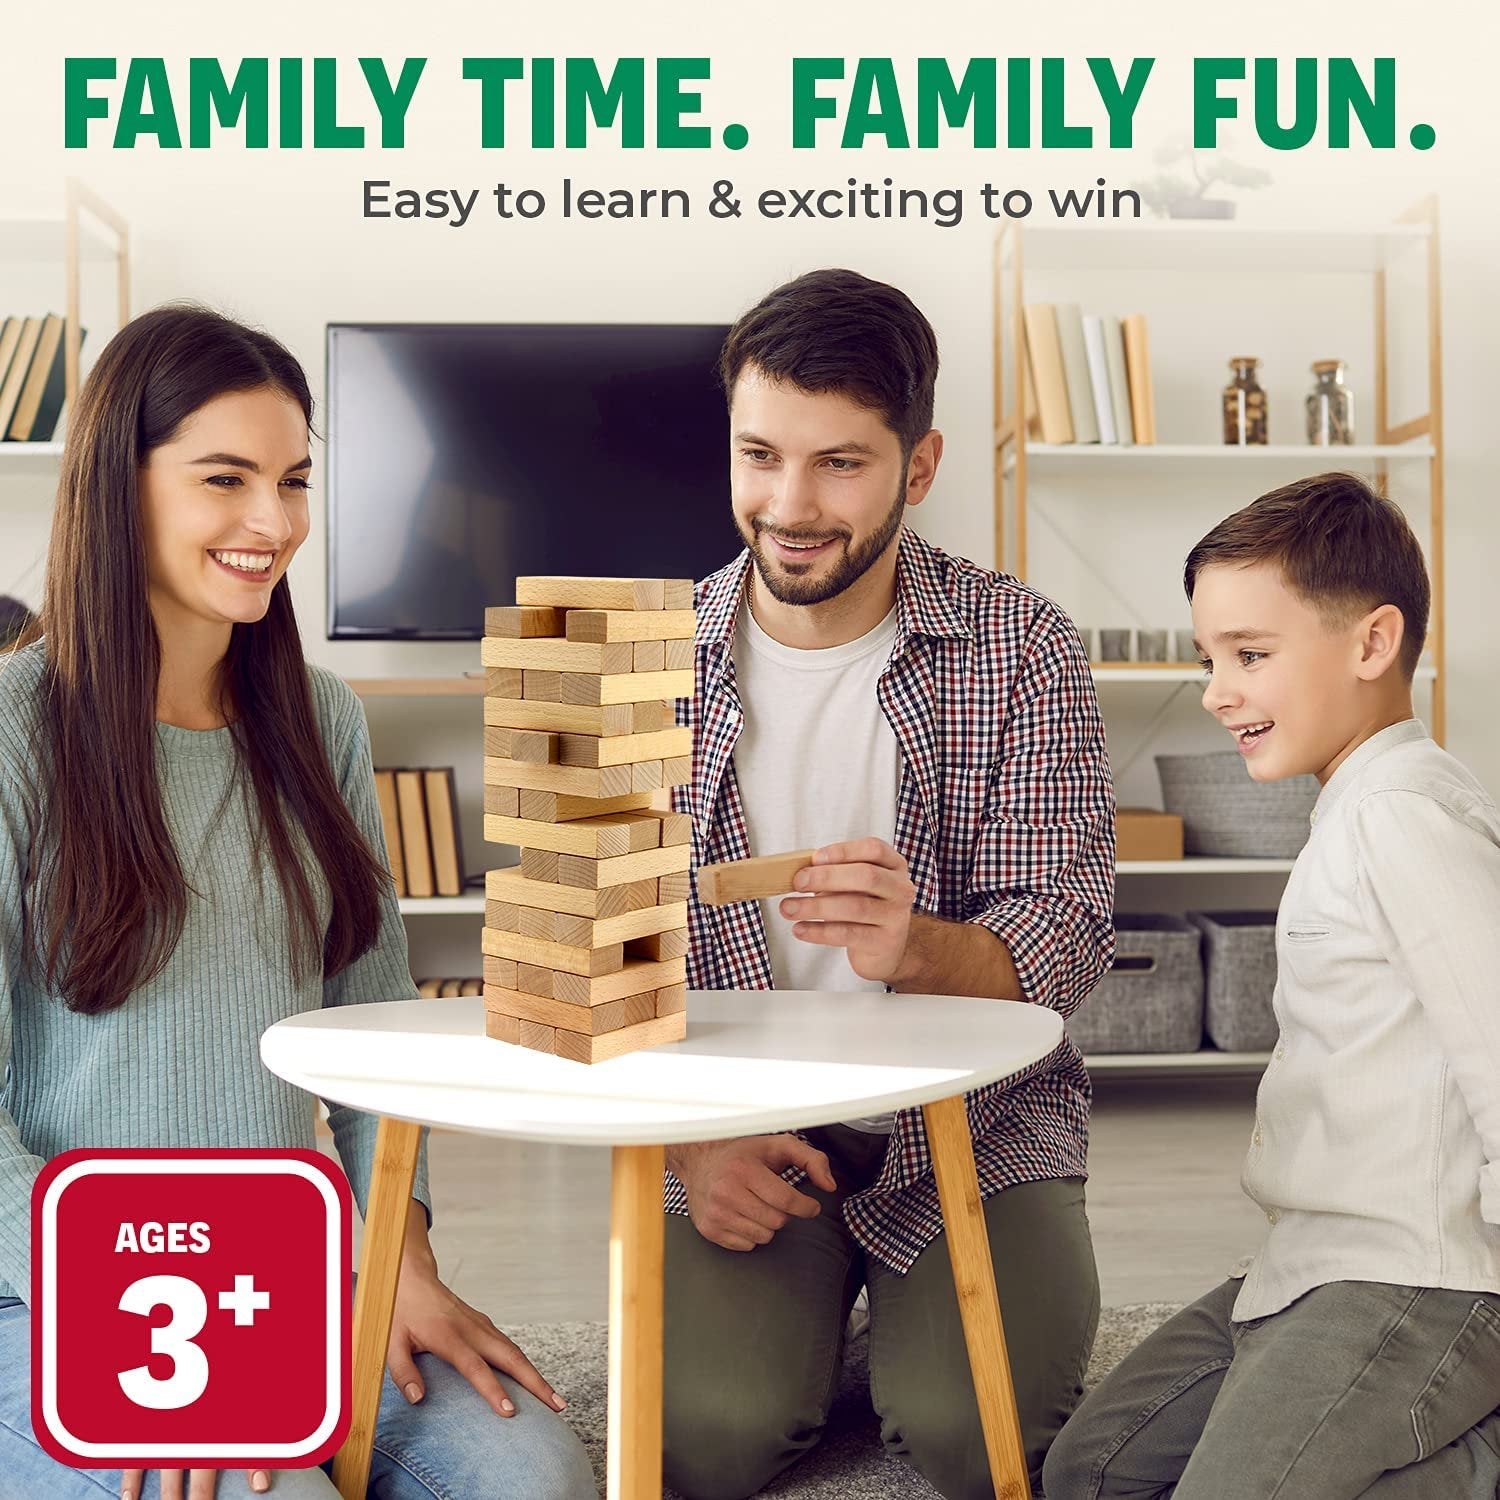 CoolToys Timber Tower Wood Block Stacking Game - Original - 48 Pieces - 1 Pack Size - Free Shipping & Returns